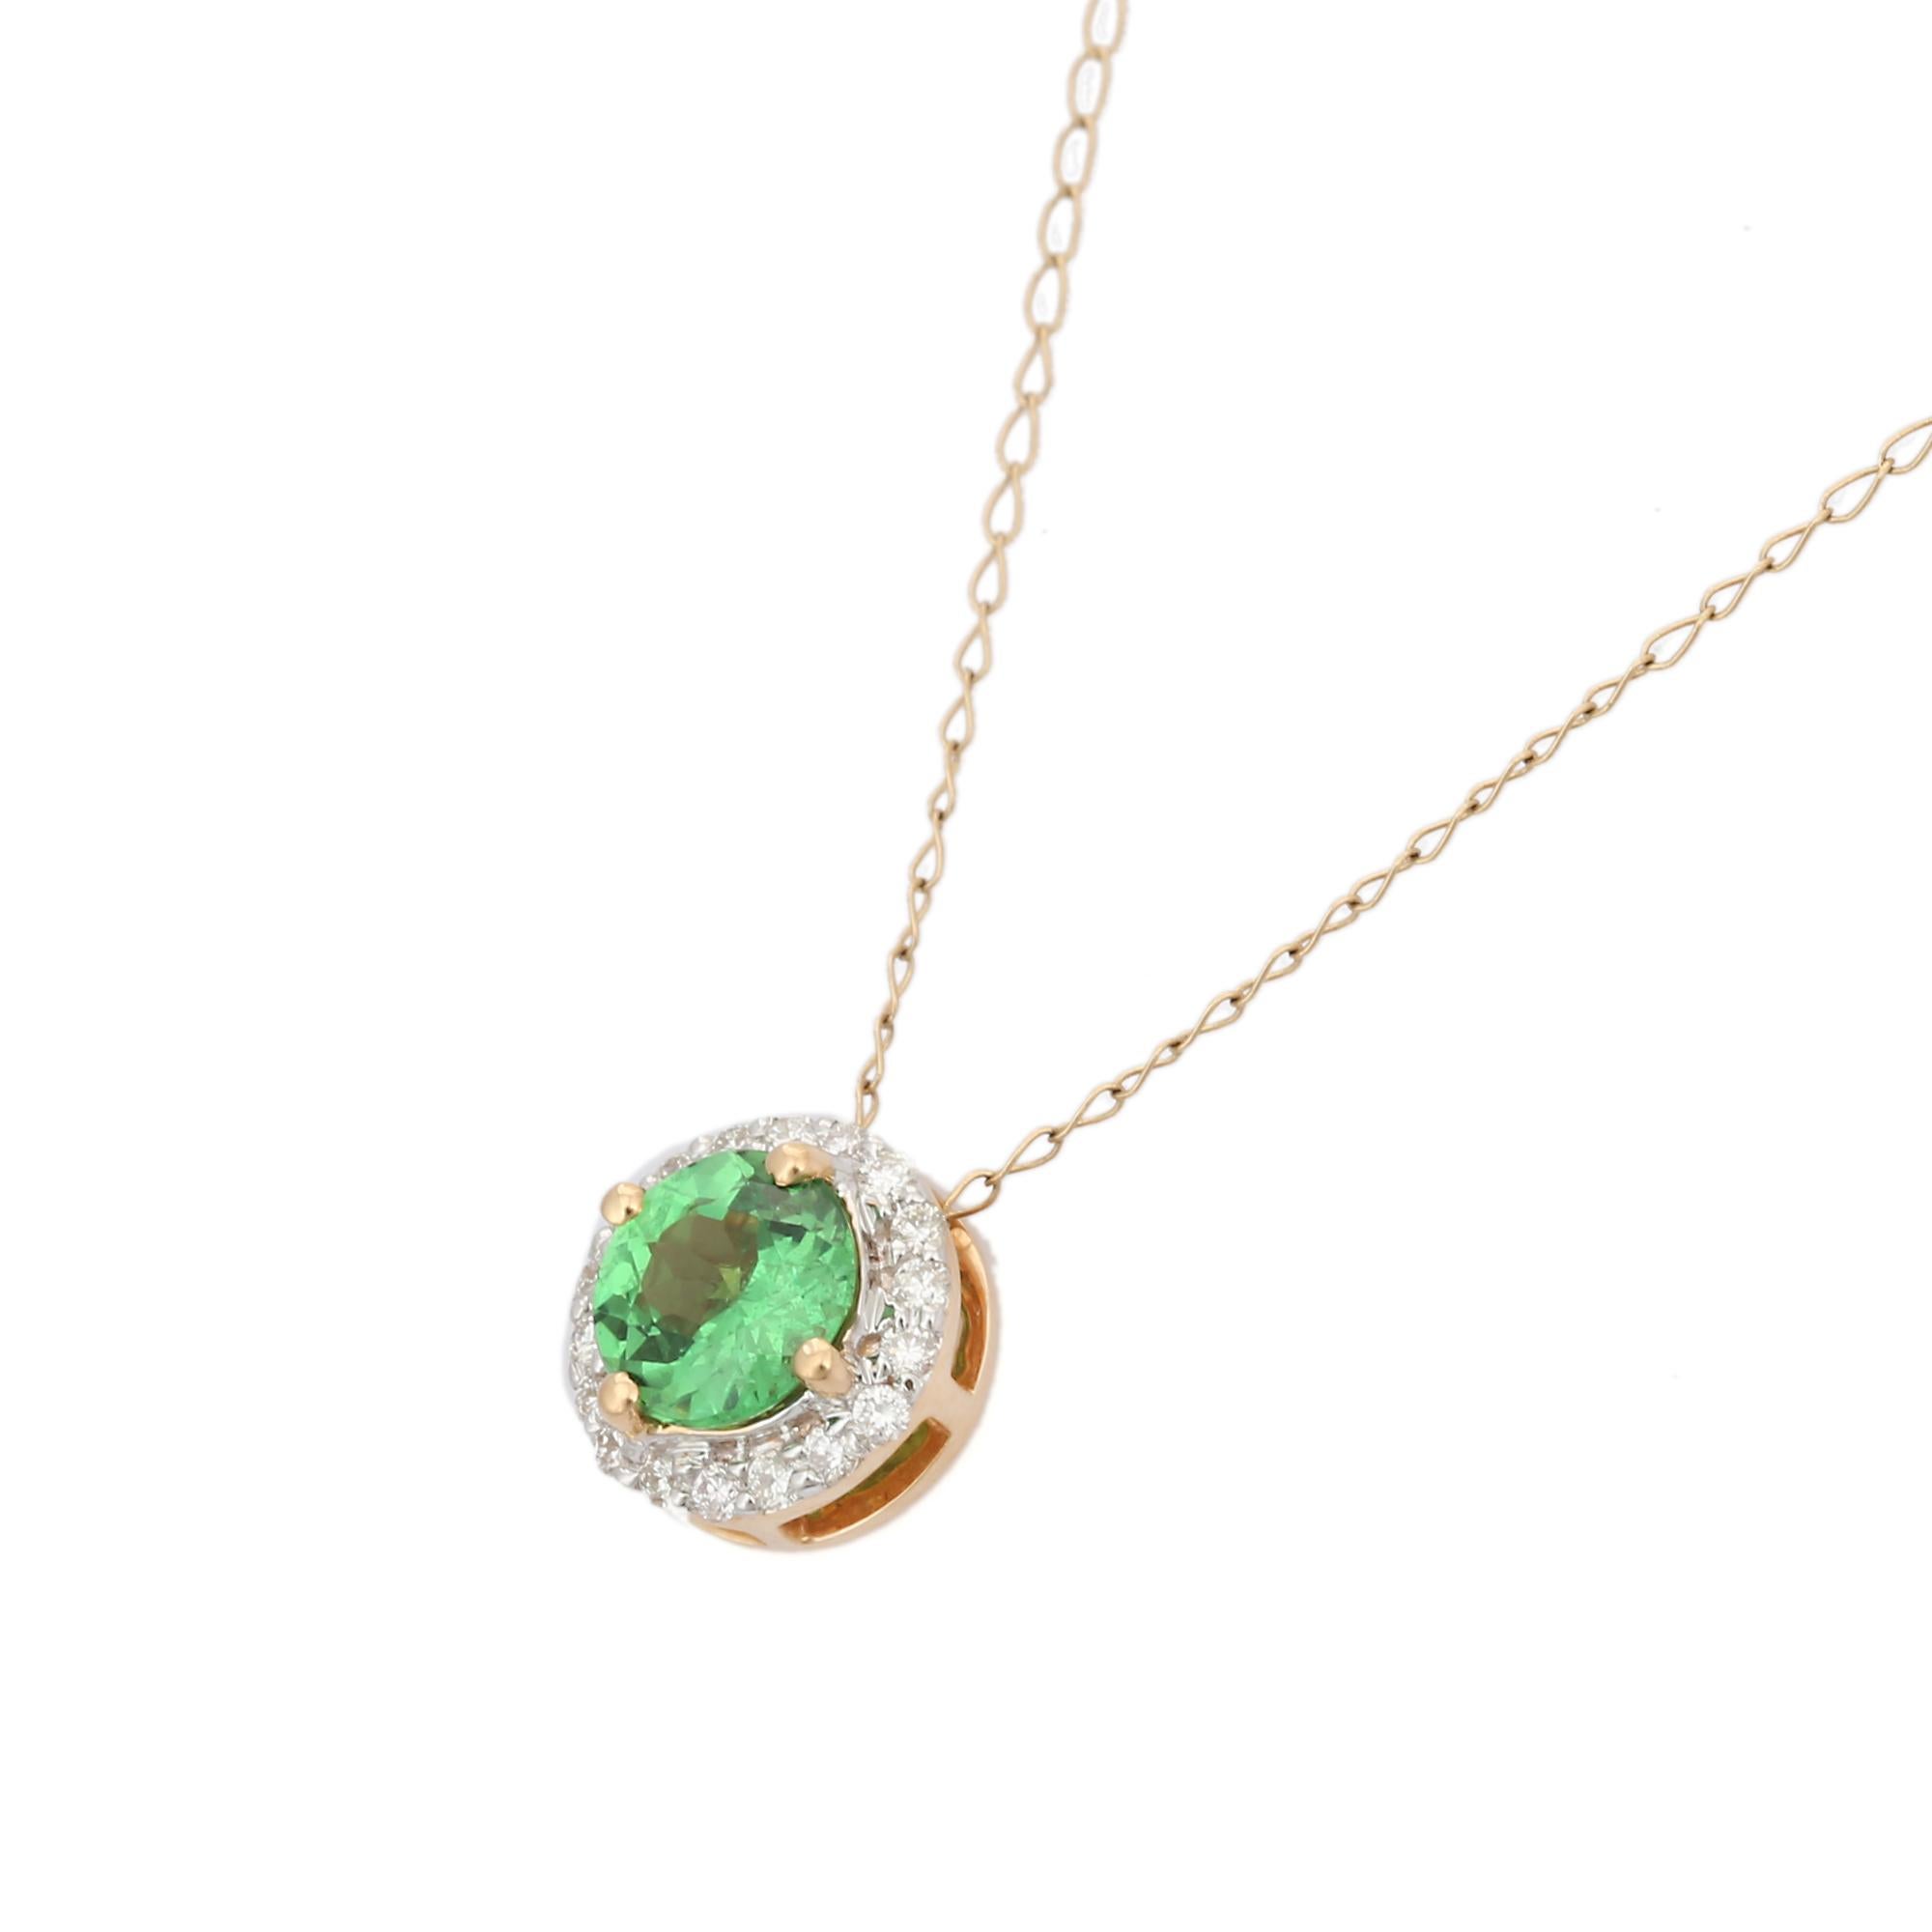 Halo Tsavorite Solitaire Necklace in 18K Gold with diamond studded around round tsavorite. This stunning piece of jewelry instantly elevates a casual look or dressy outfit. 
Tsavorite heals the heart chakra and facilitate communication. Designed